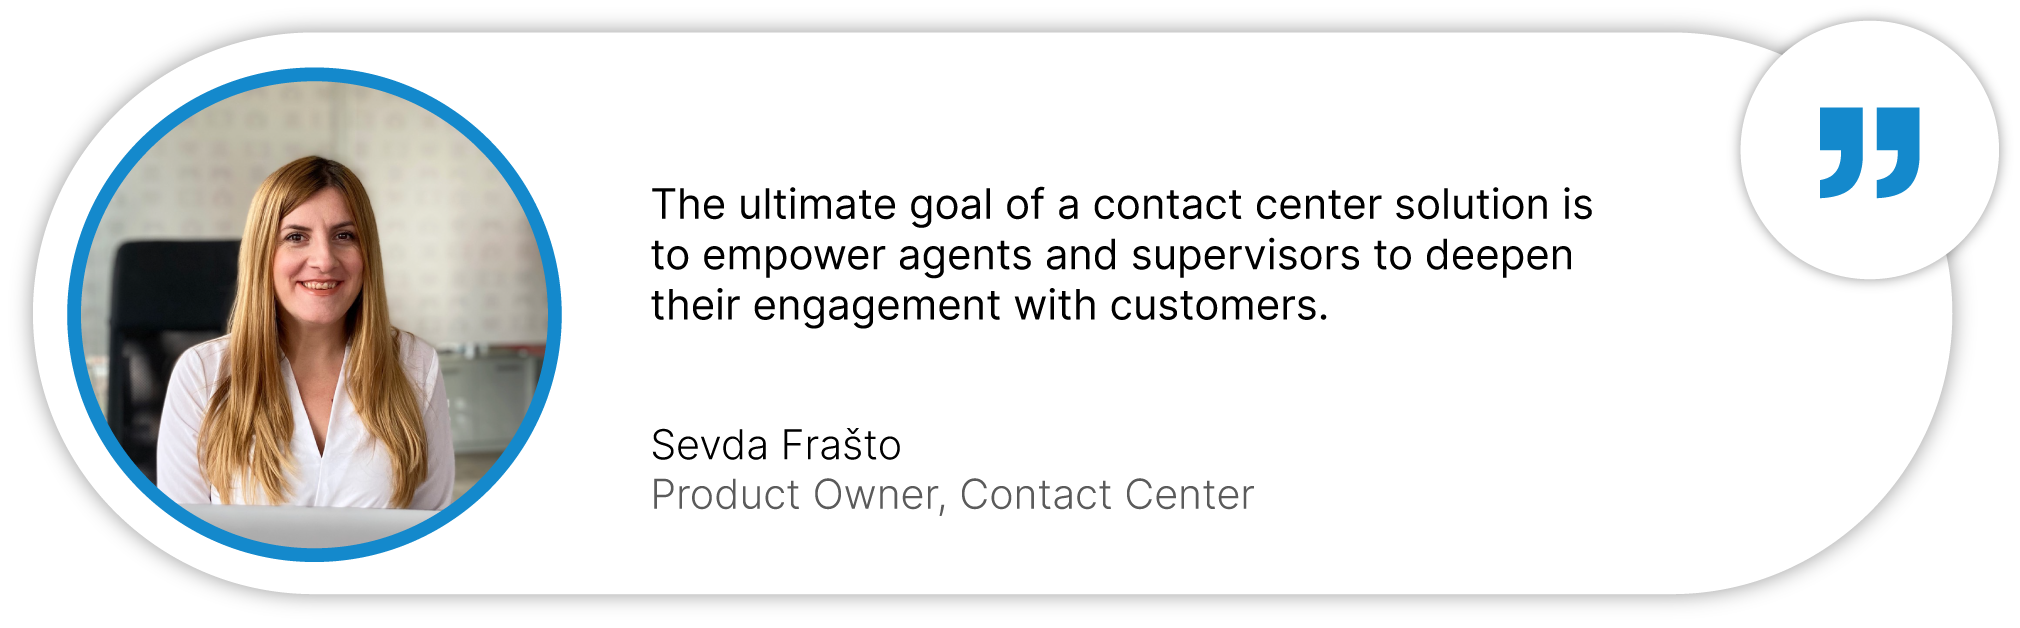 Bicom Systems Contact center product owner quote